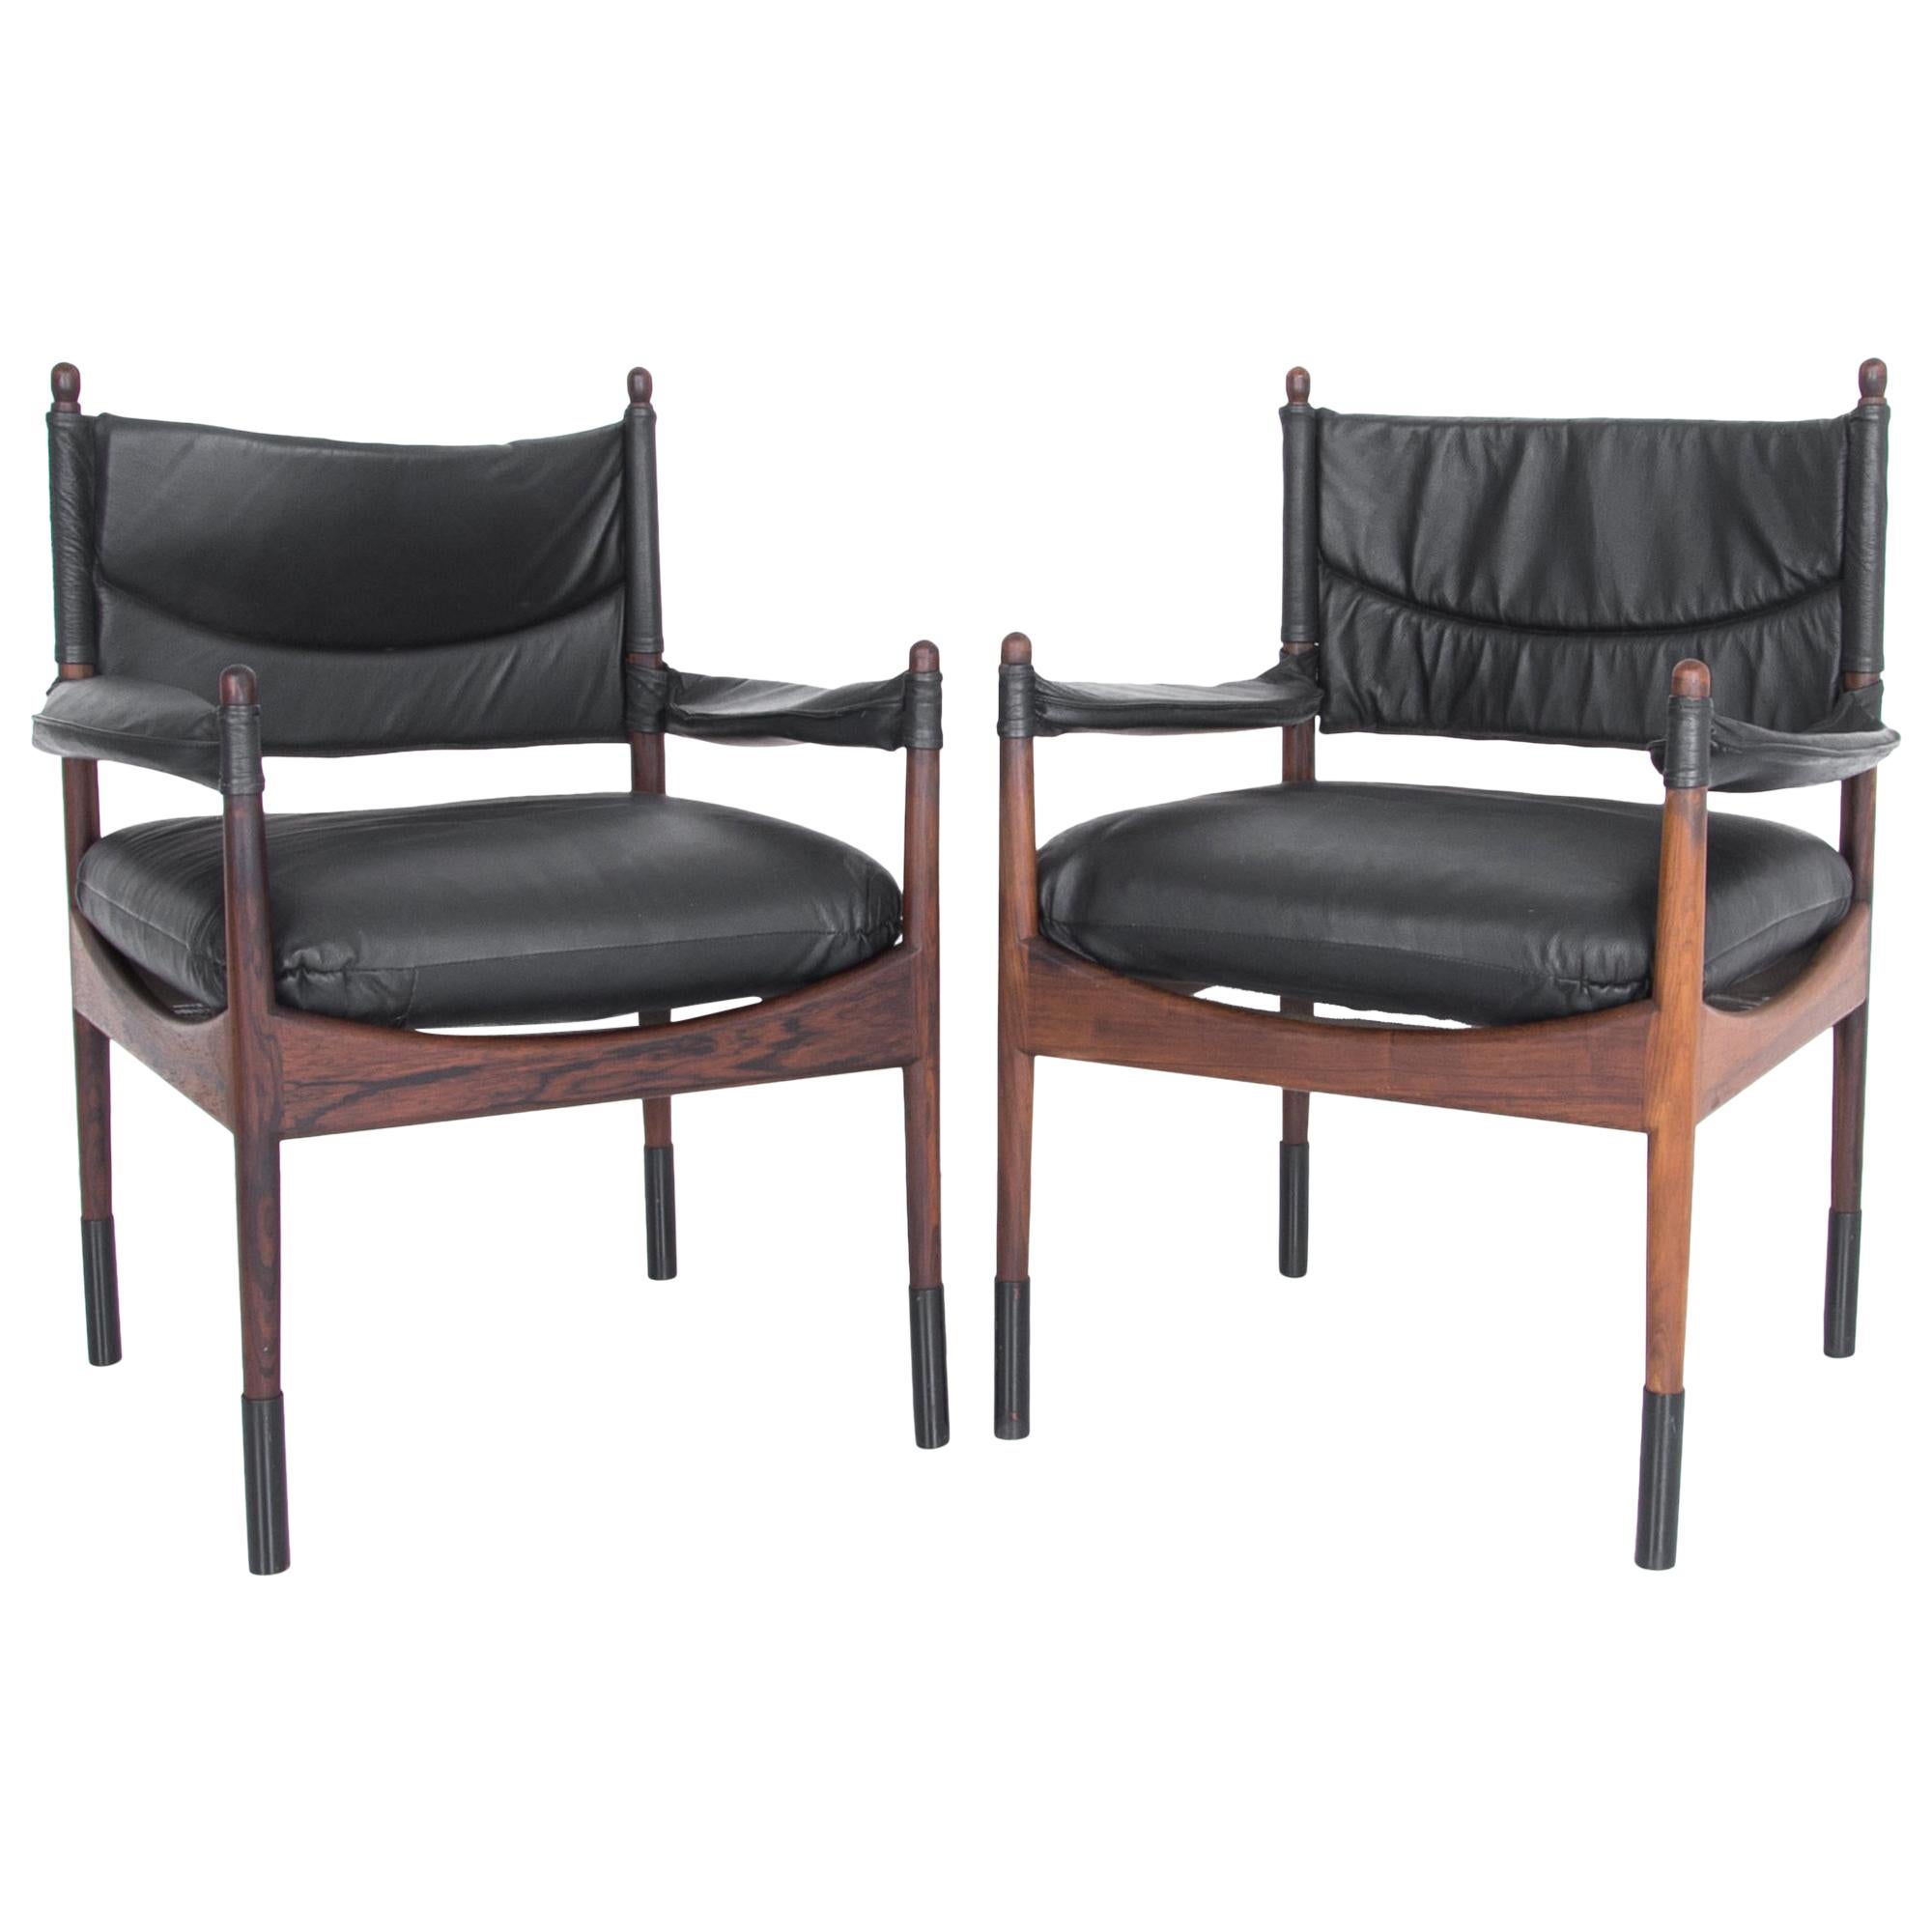 Kristian Vedel Rosewood and Leather Chairs, a Pair